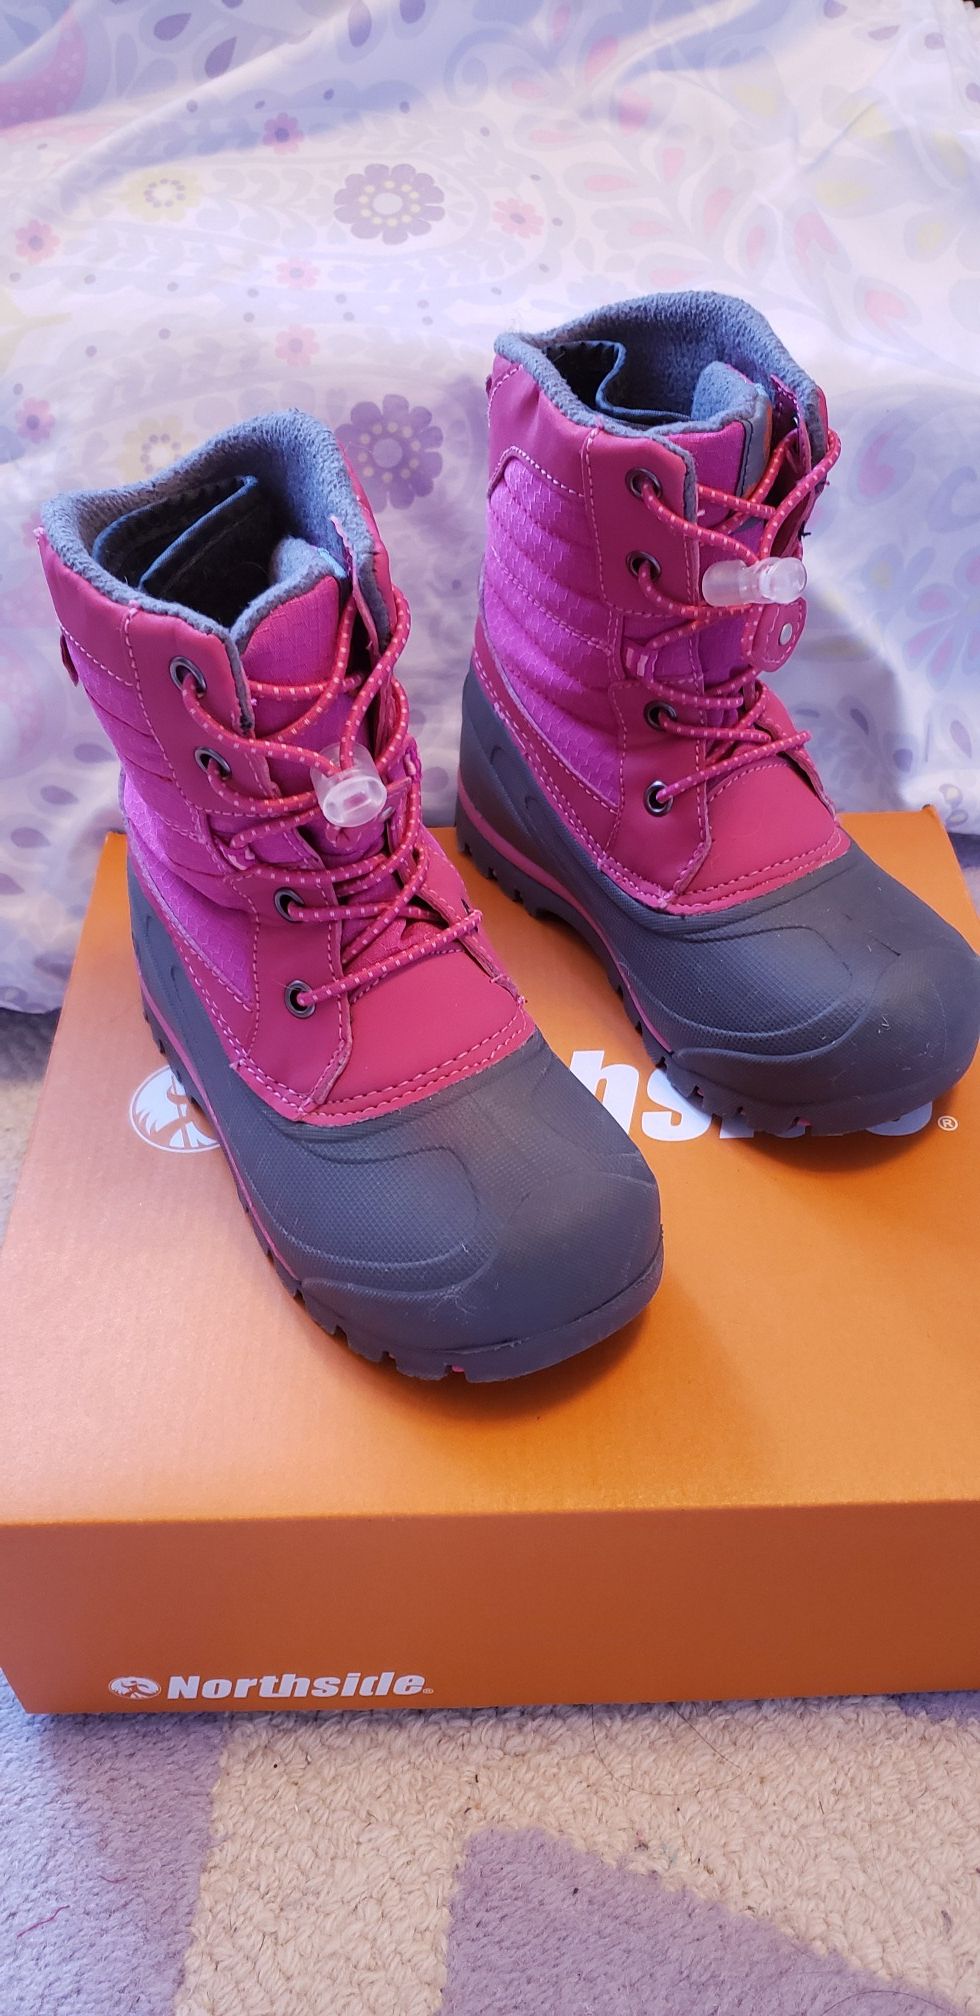 Girls Snow boots size 12 (toddler)